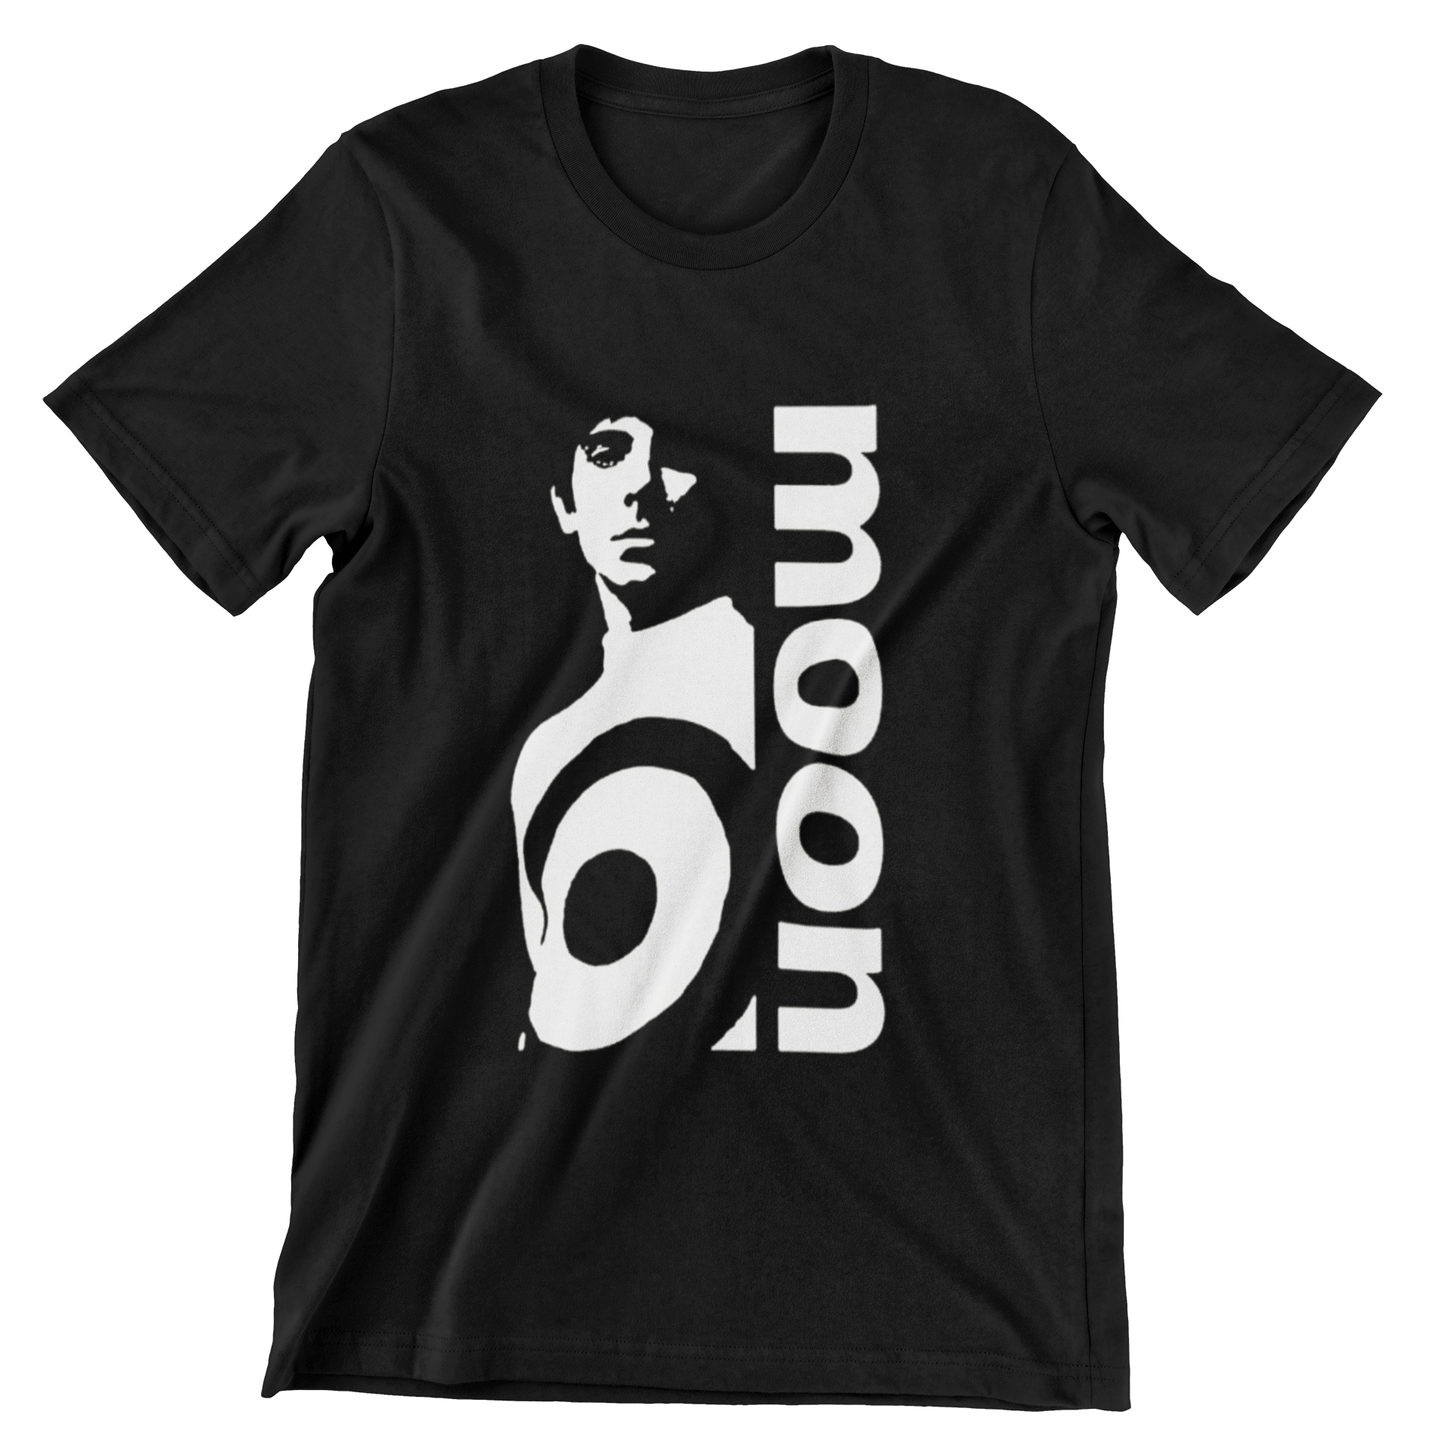 The Who T Shirt Keith Moon Promo t shirts rockviewtees